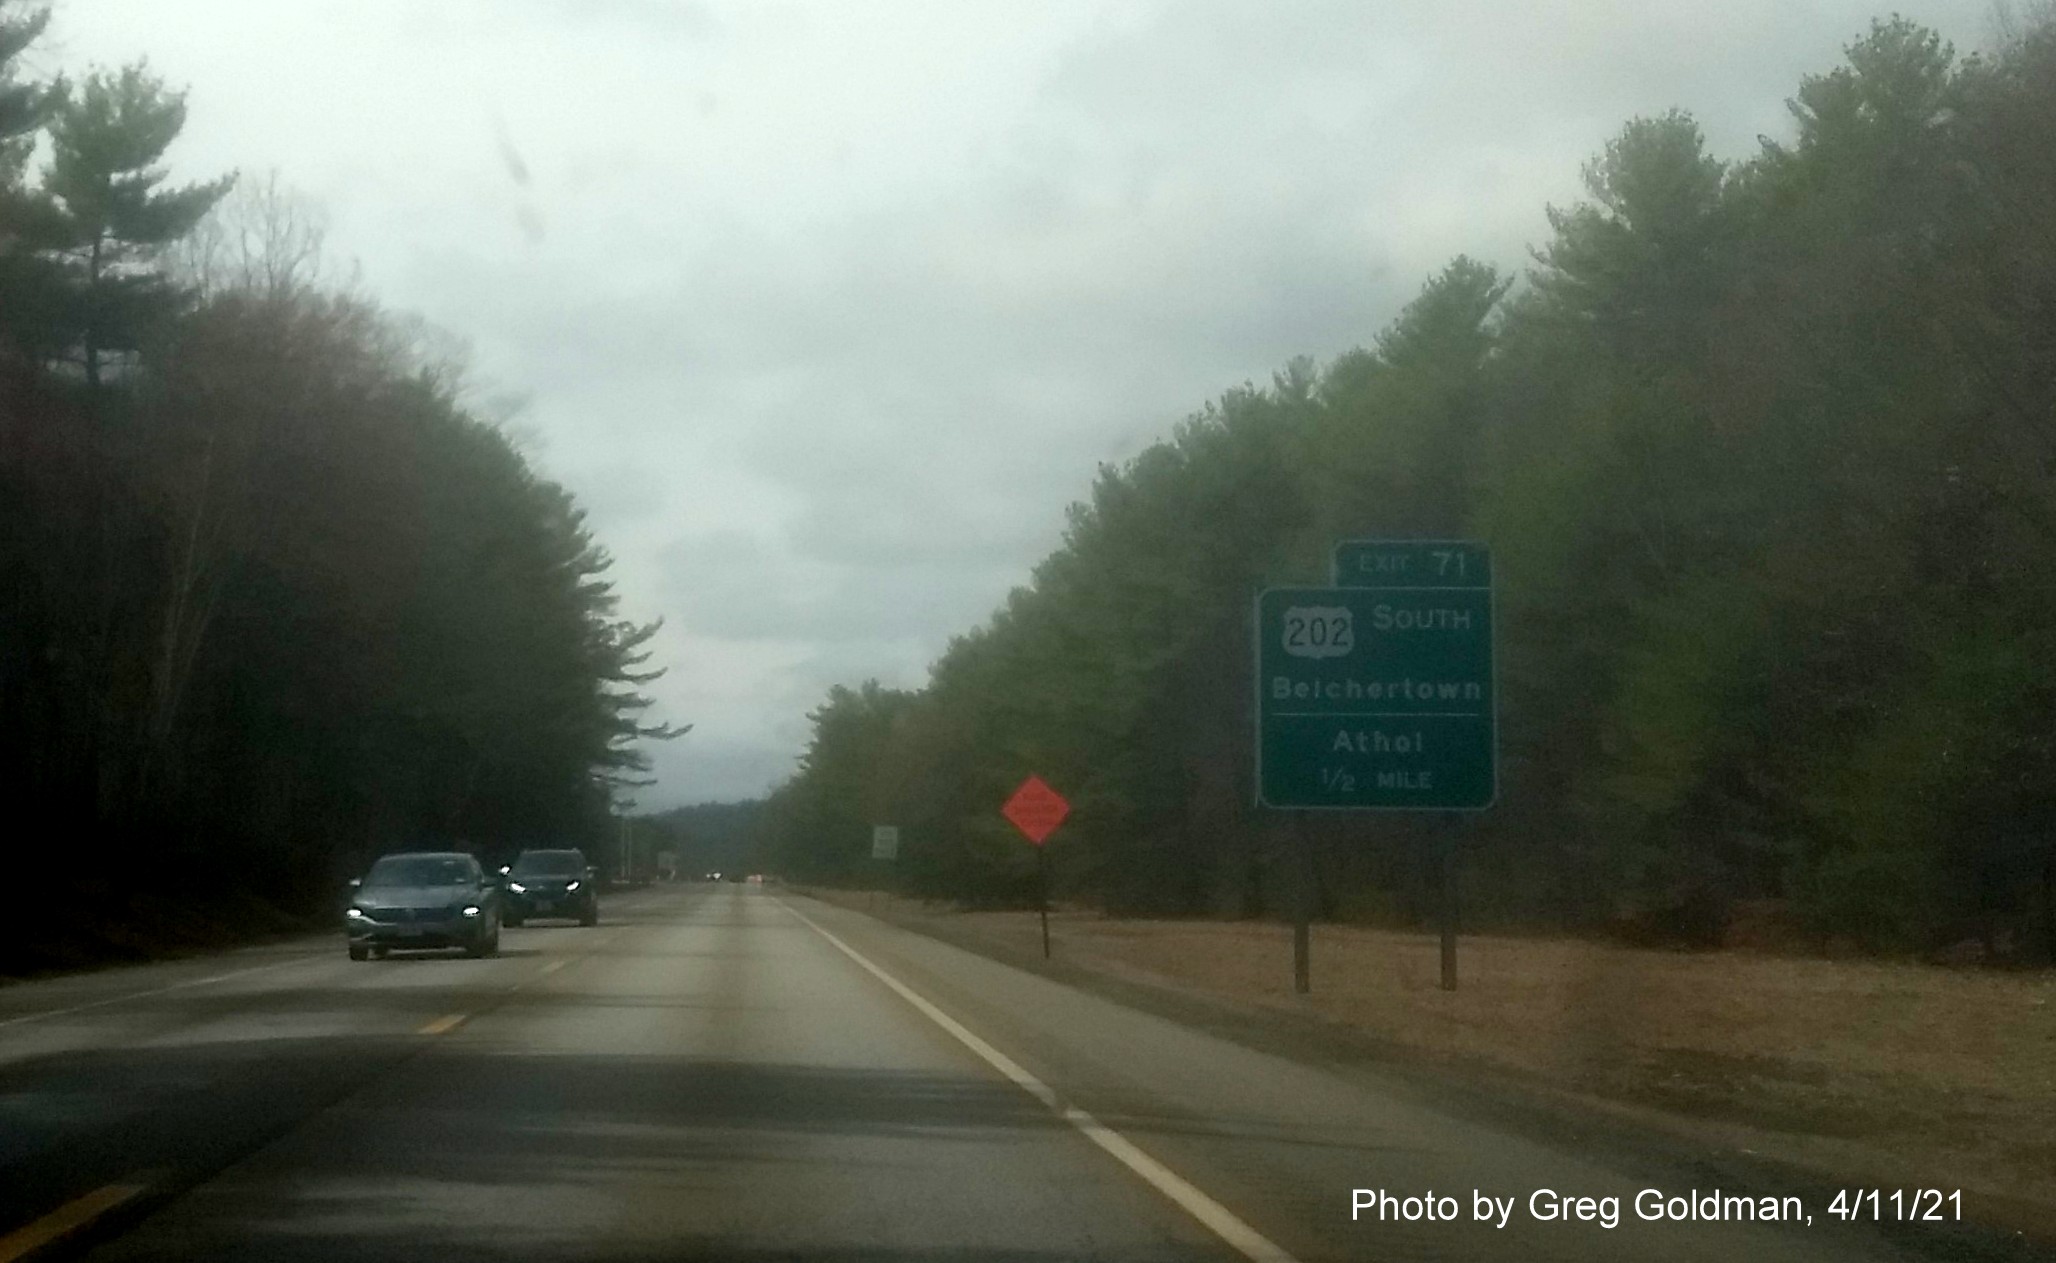 Image of 1/2 Mile advance sign for US 202 South exit with new milepost based exit number on MA 2 West in Athol, by Greg Goldman, April 2021